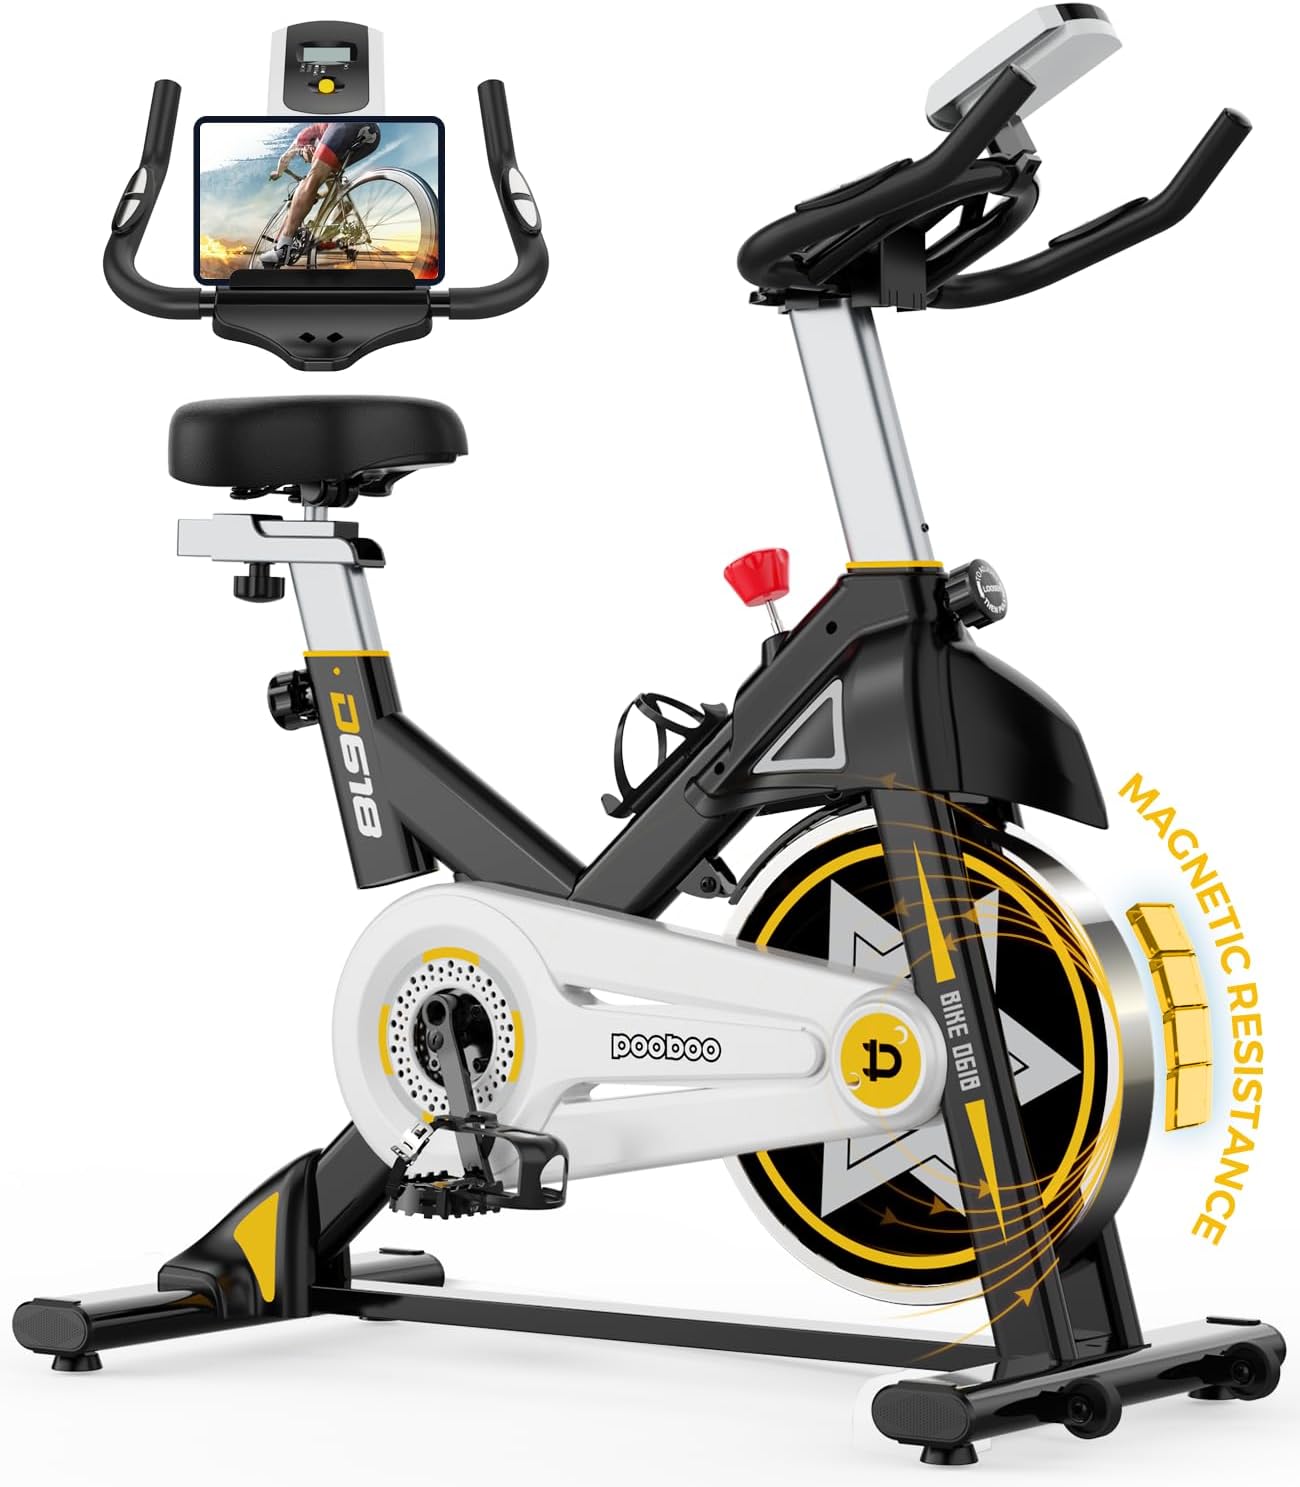 Shop Now for the Lowest Prices - POOBOO Exercise Bike, Magnetic Resistance Indoor Cycling Bike with Comfortable Seat Cushion